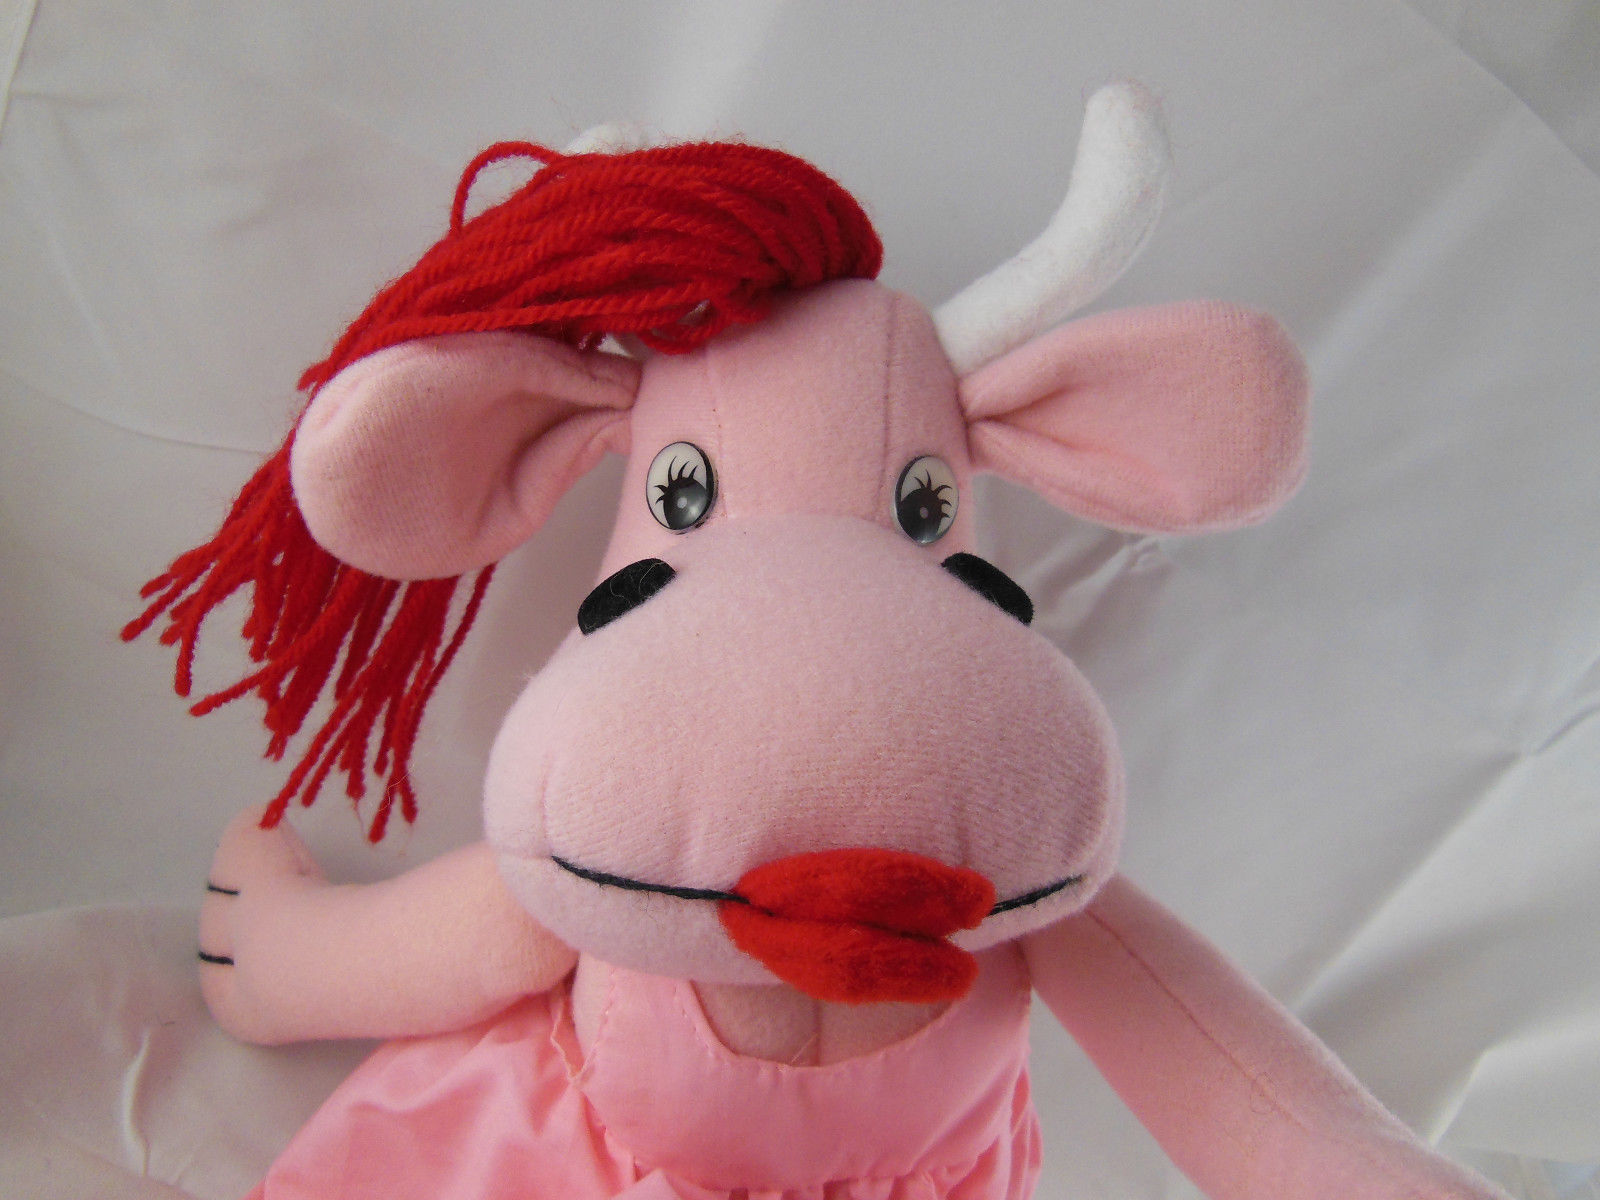 Sugar Loaf Plush Cow Pink with Red Hair 1991 pink dress 17" RARE Hard to Find - $11.93